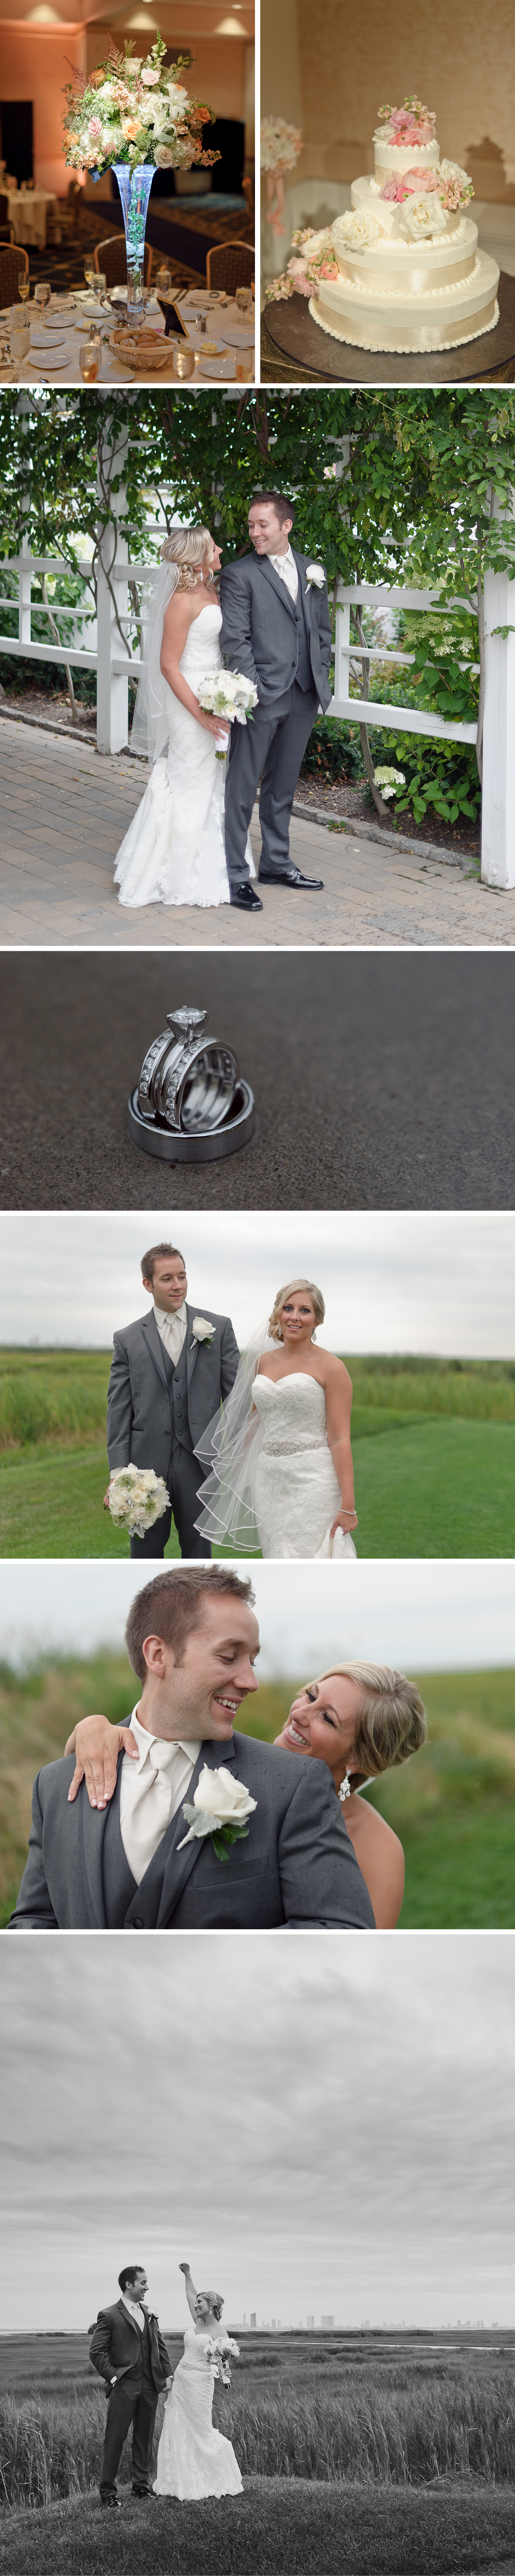 Stockton Seaview wedding photography by Jeremy Bischoff Photography